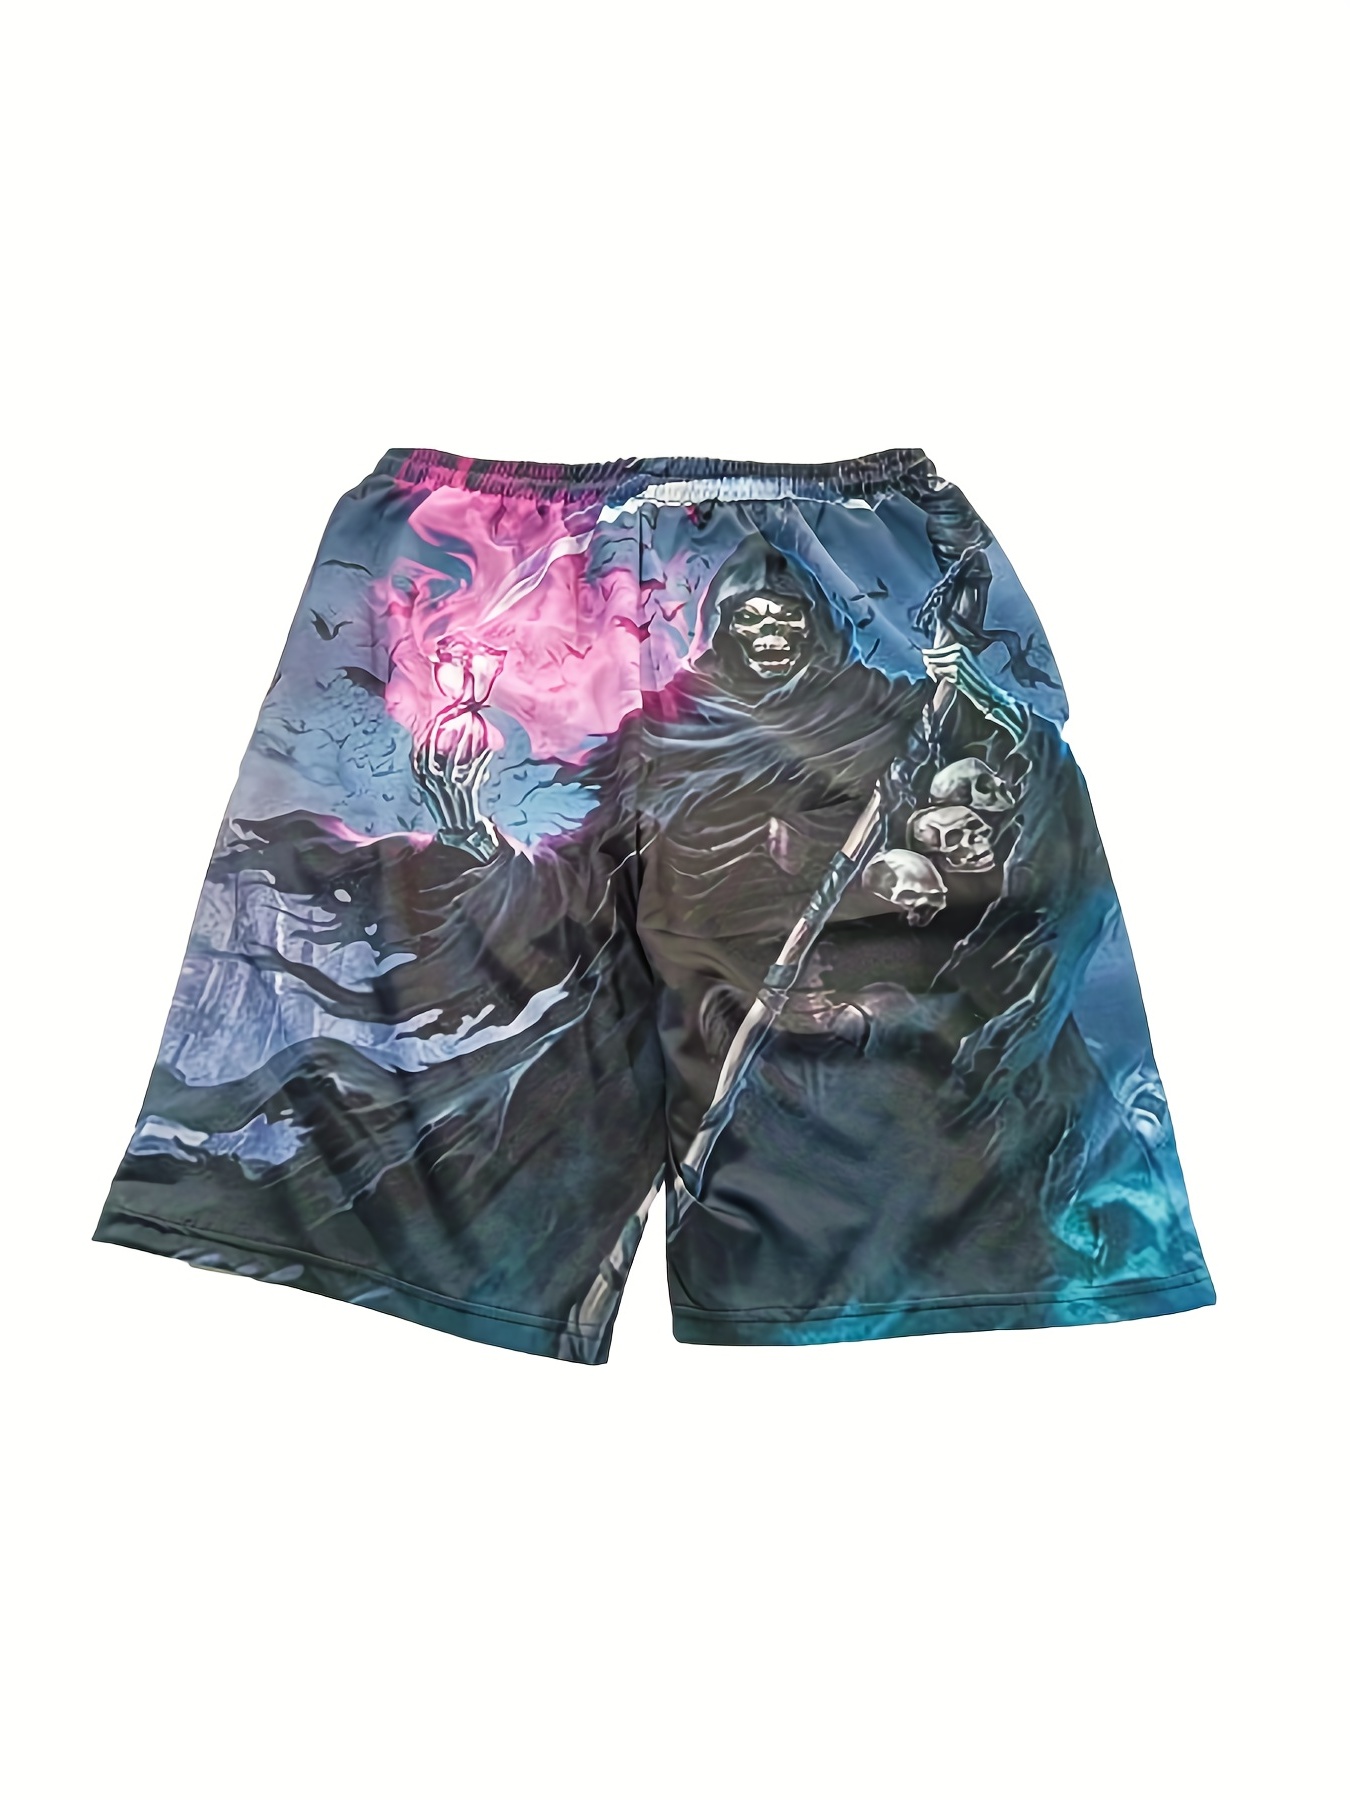  Graphic Shorts For Men